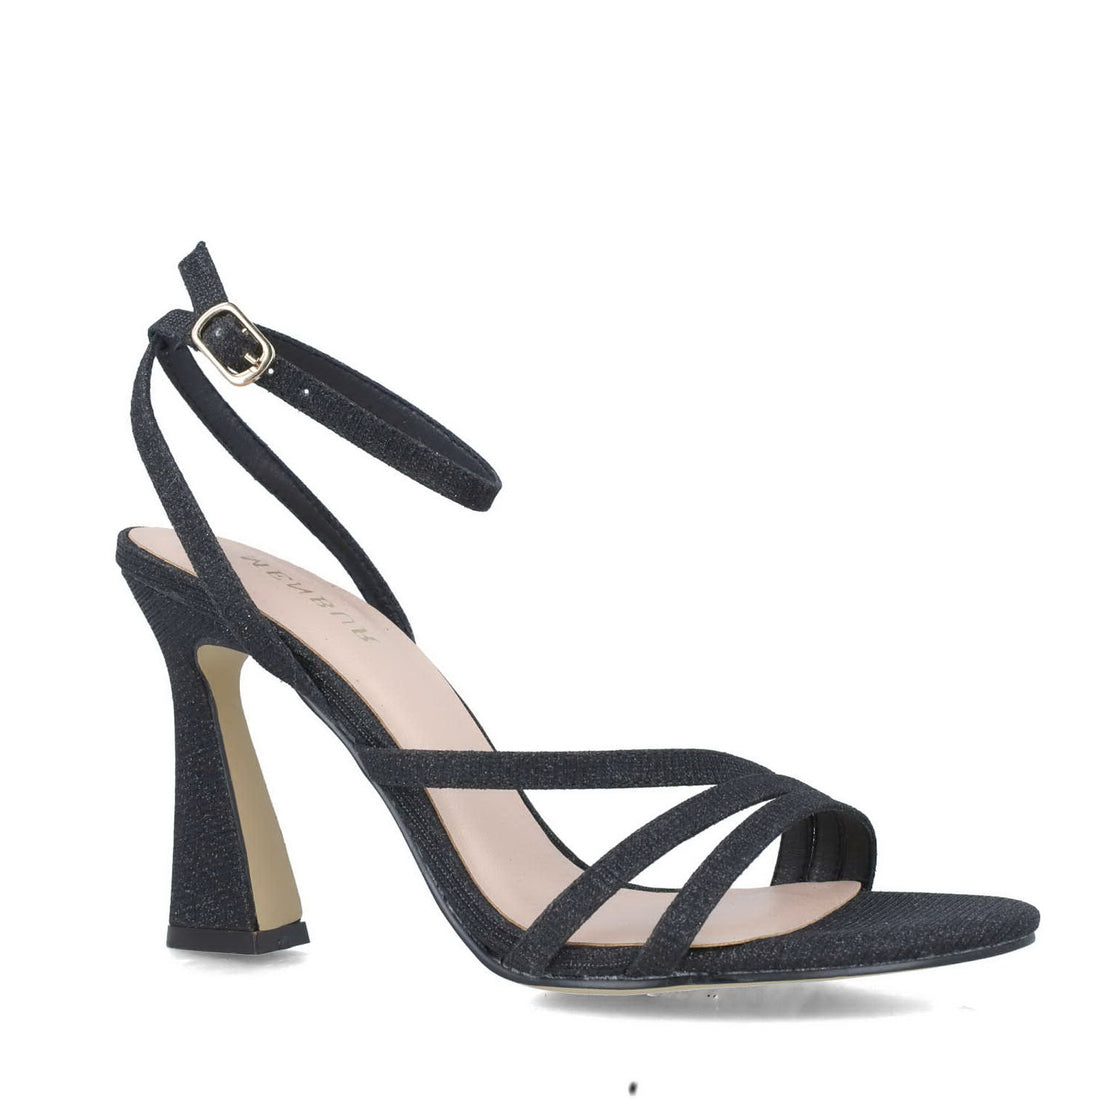 Black High-Heel Sandals With Ankle-Strap